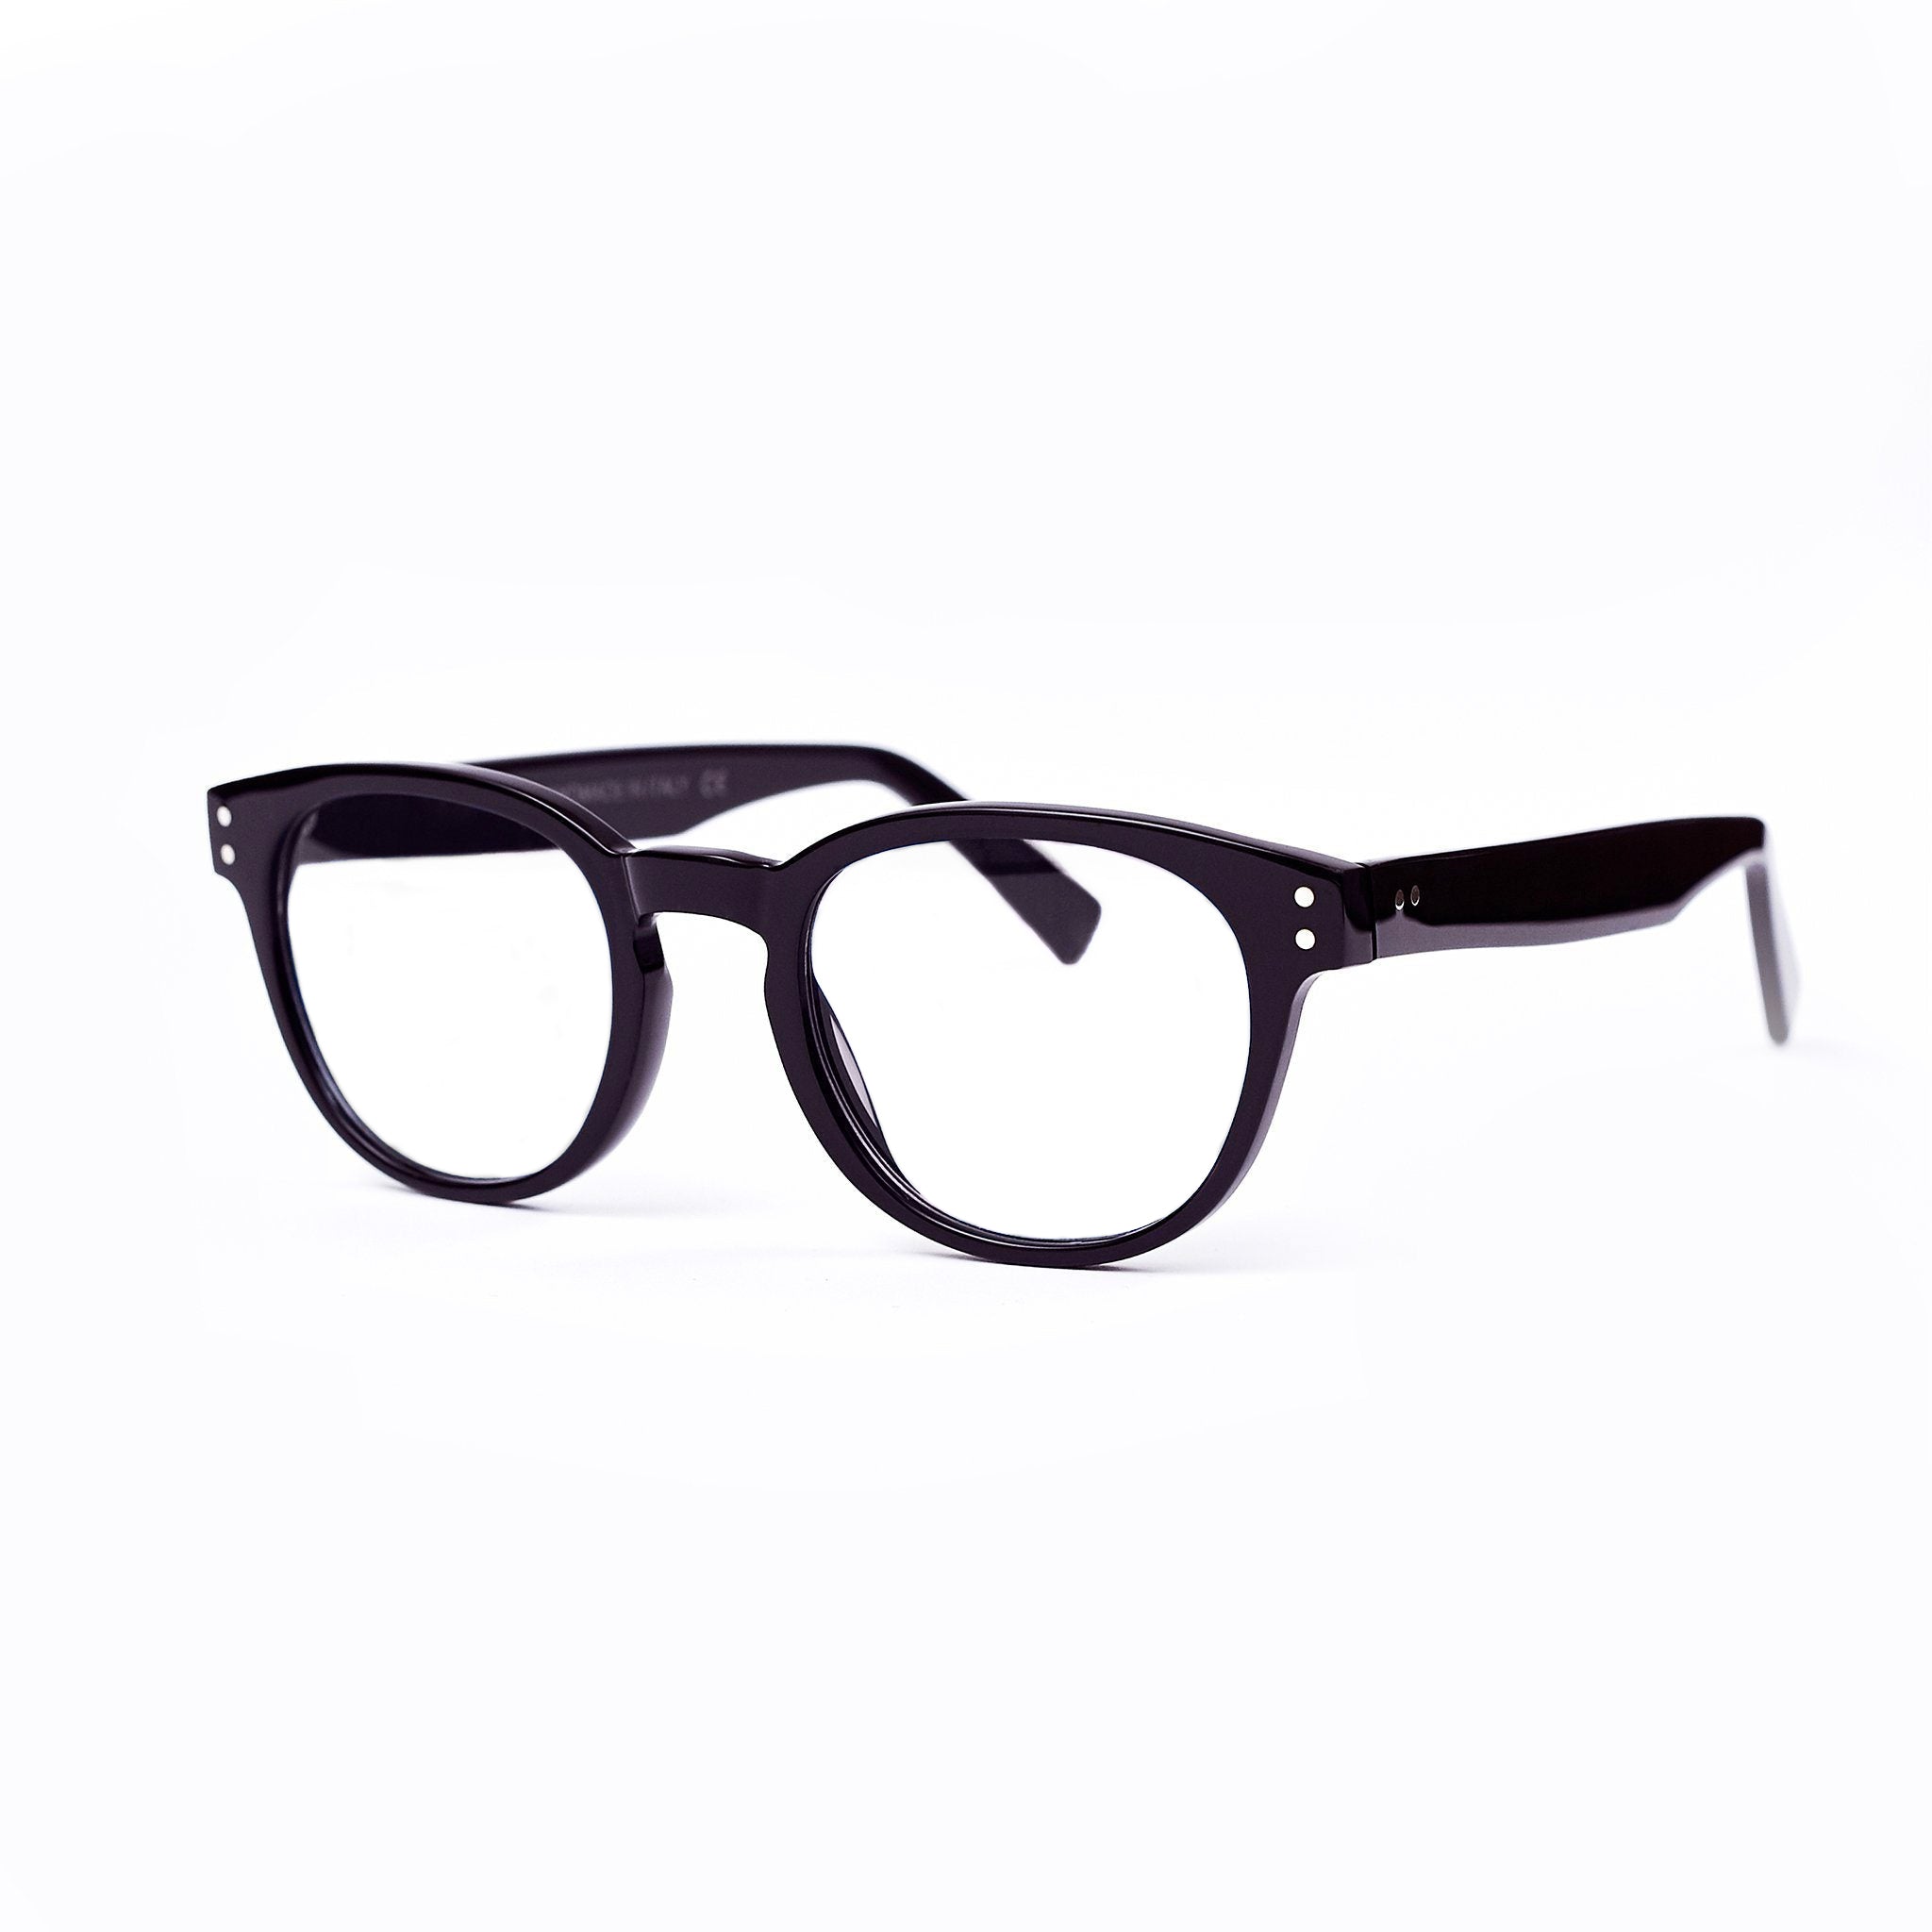 Ameos eyewear spica optical glasses in black frames, unisex and handmade in italy.